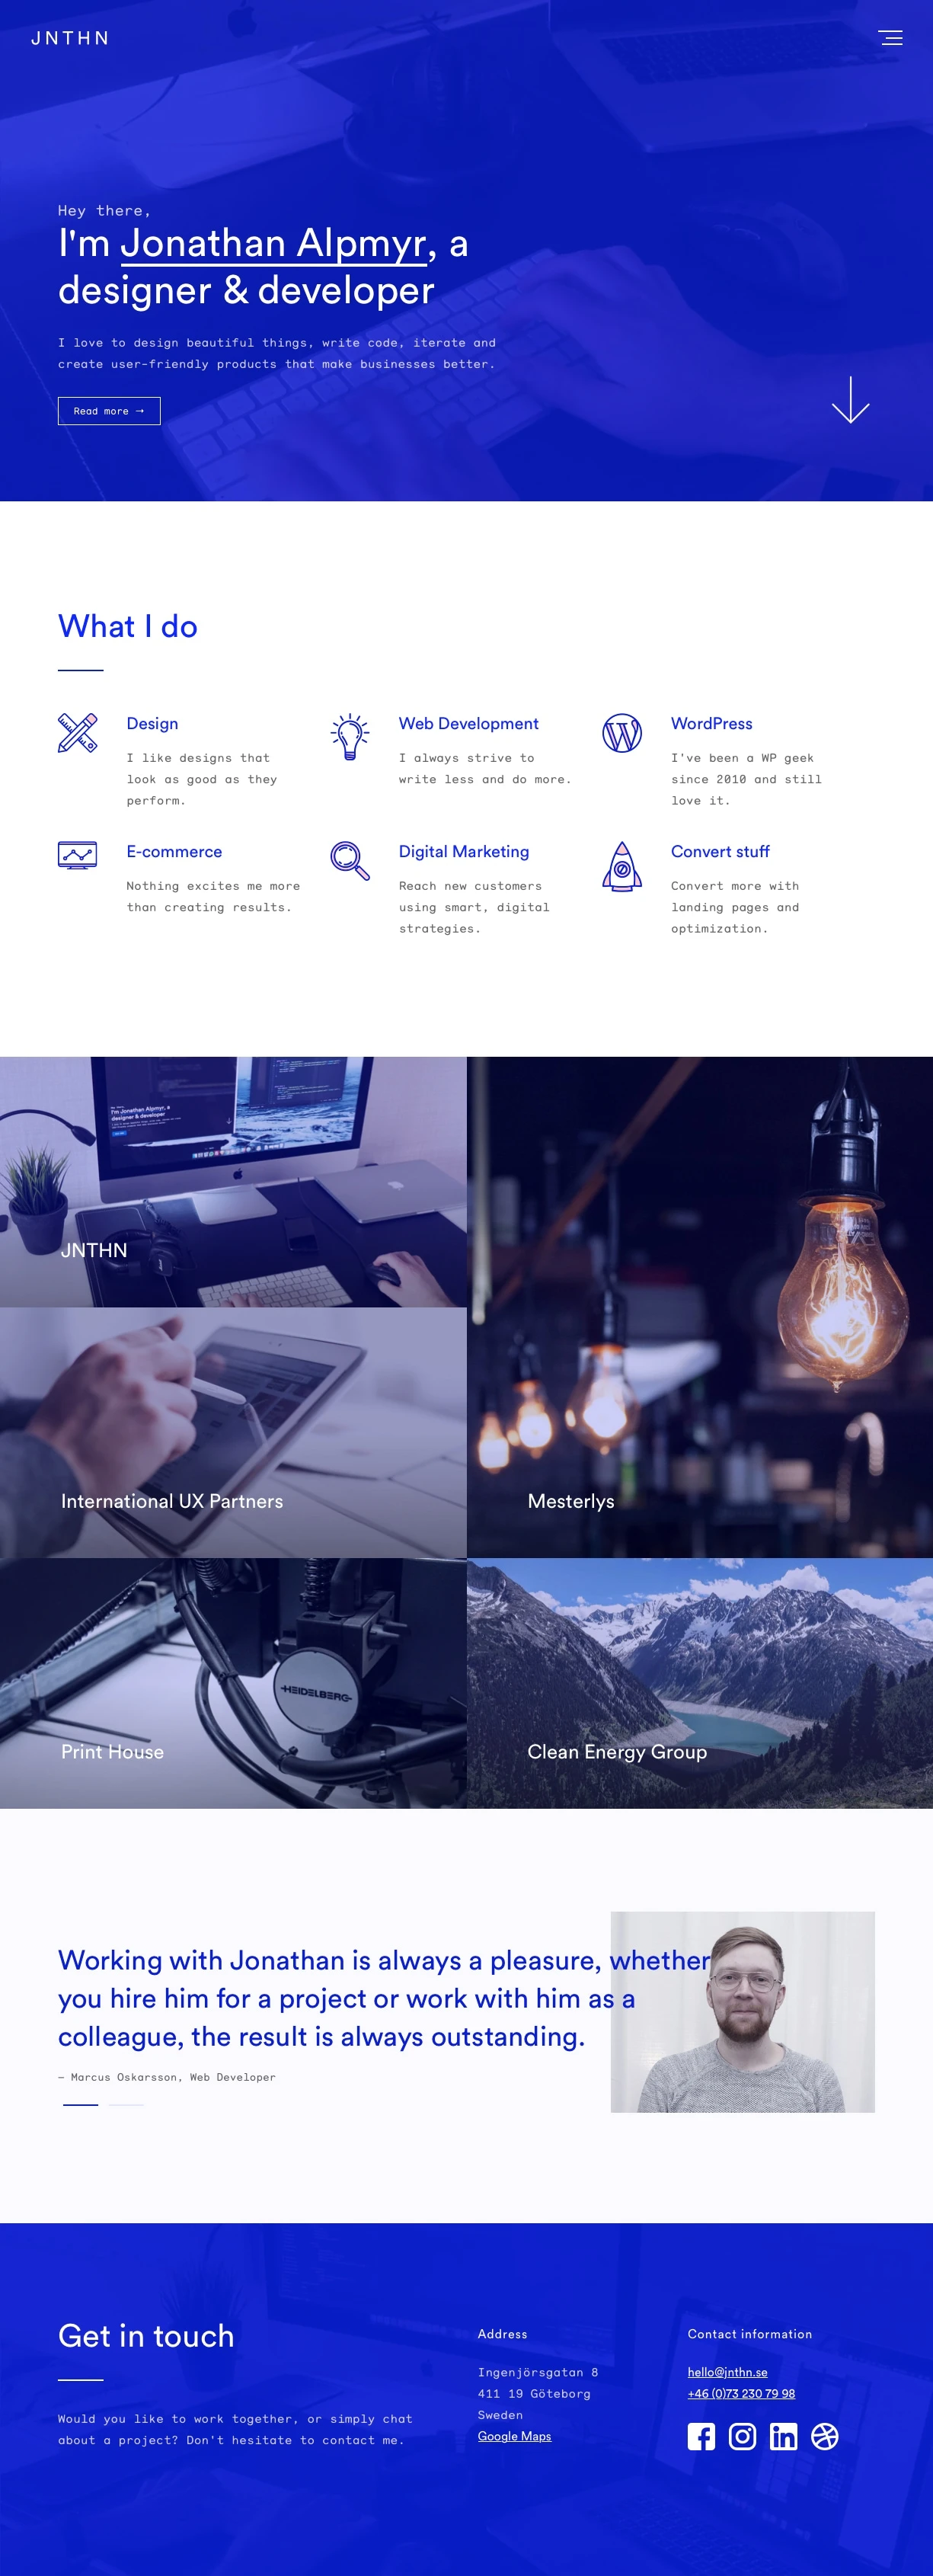 Jonathan Alpmyr Landing Page Example: I love to design beautiful things, write code, iterate and create user-friendly products that make businesses better.